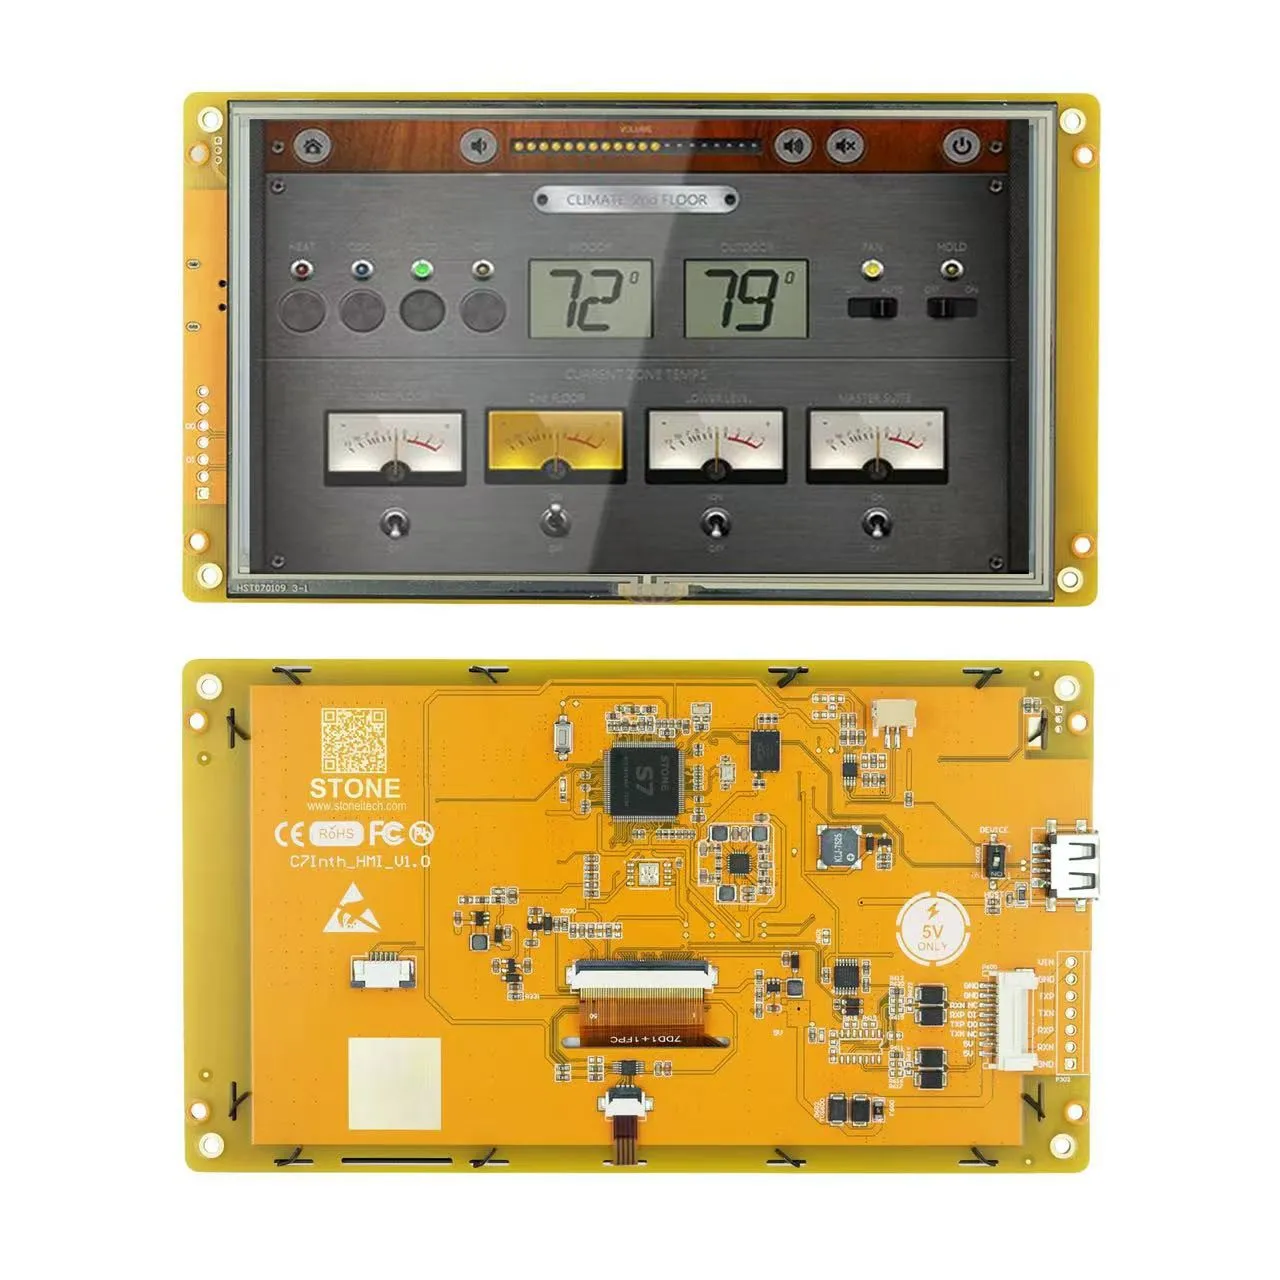 7.0 Inch Smart HMI TFT Driver Flash Memory UART port power supply ready-made Basic Control Program and Powerful Design Software